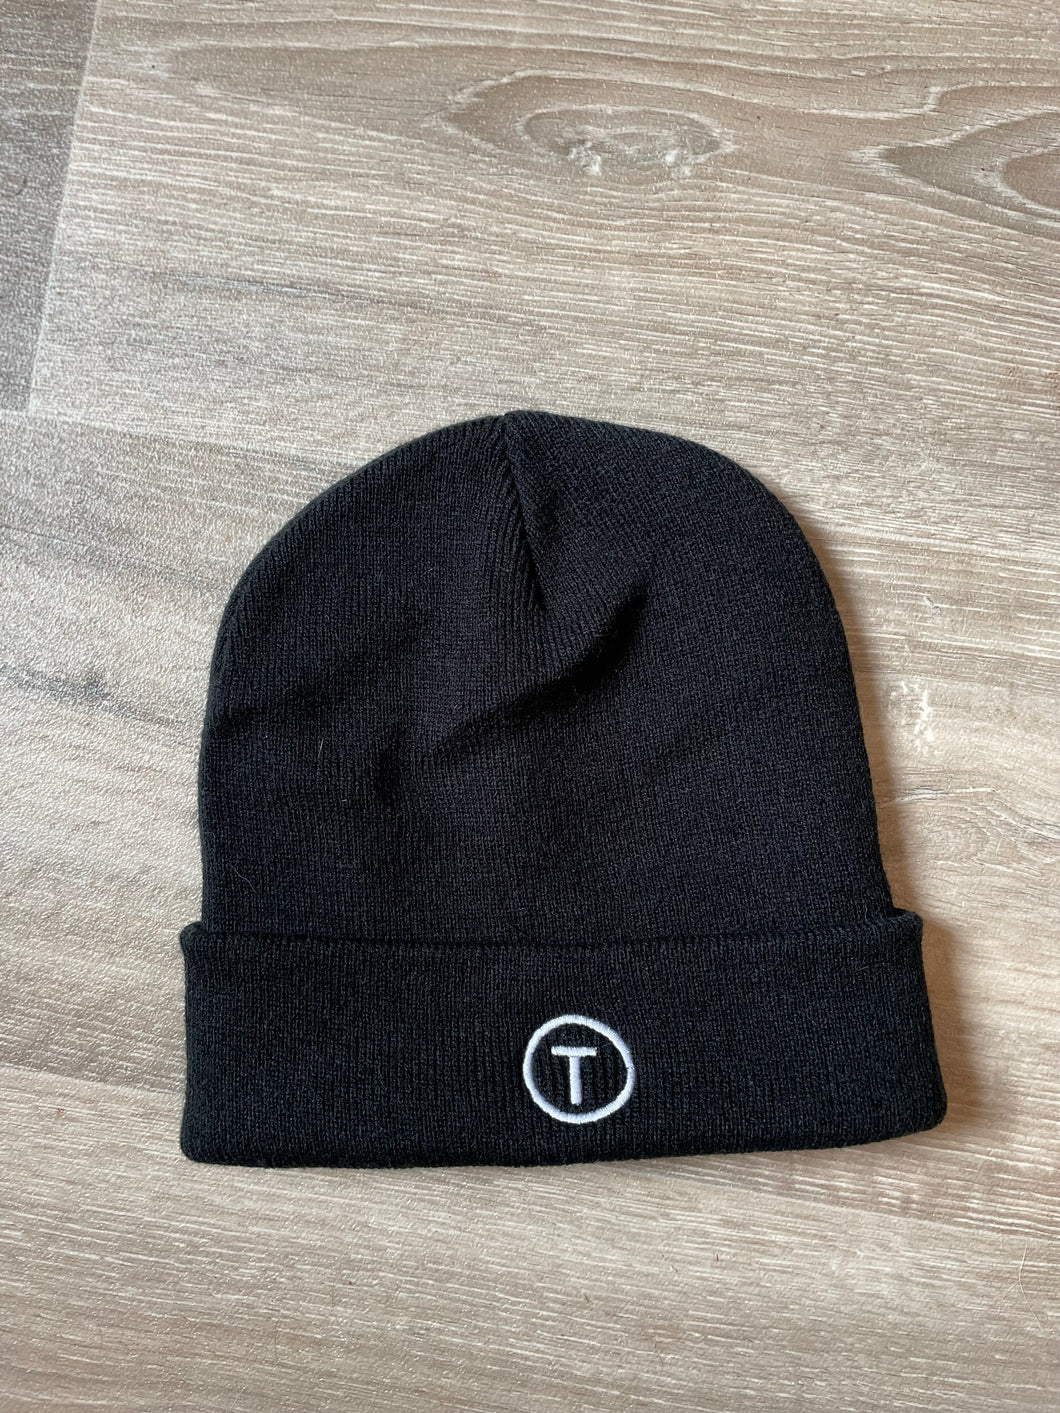 Together Beanie Hat